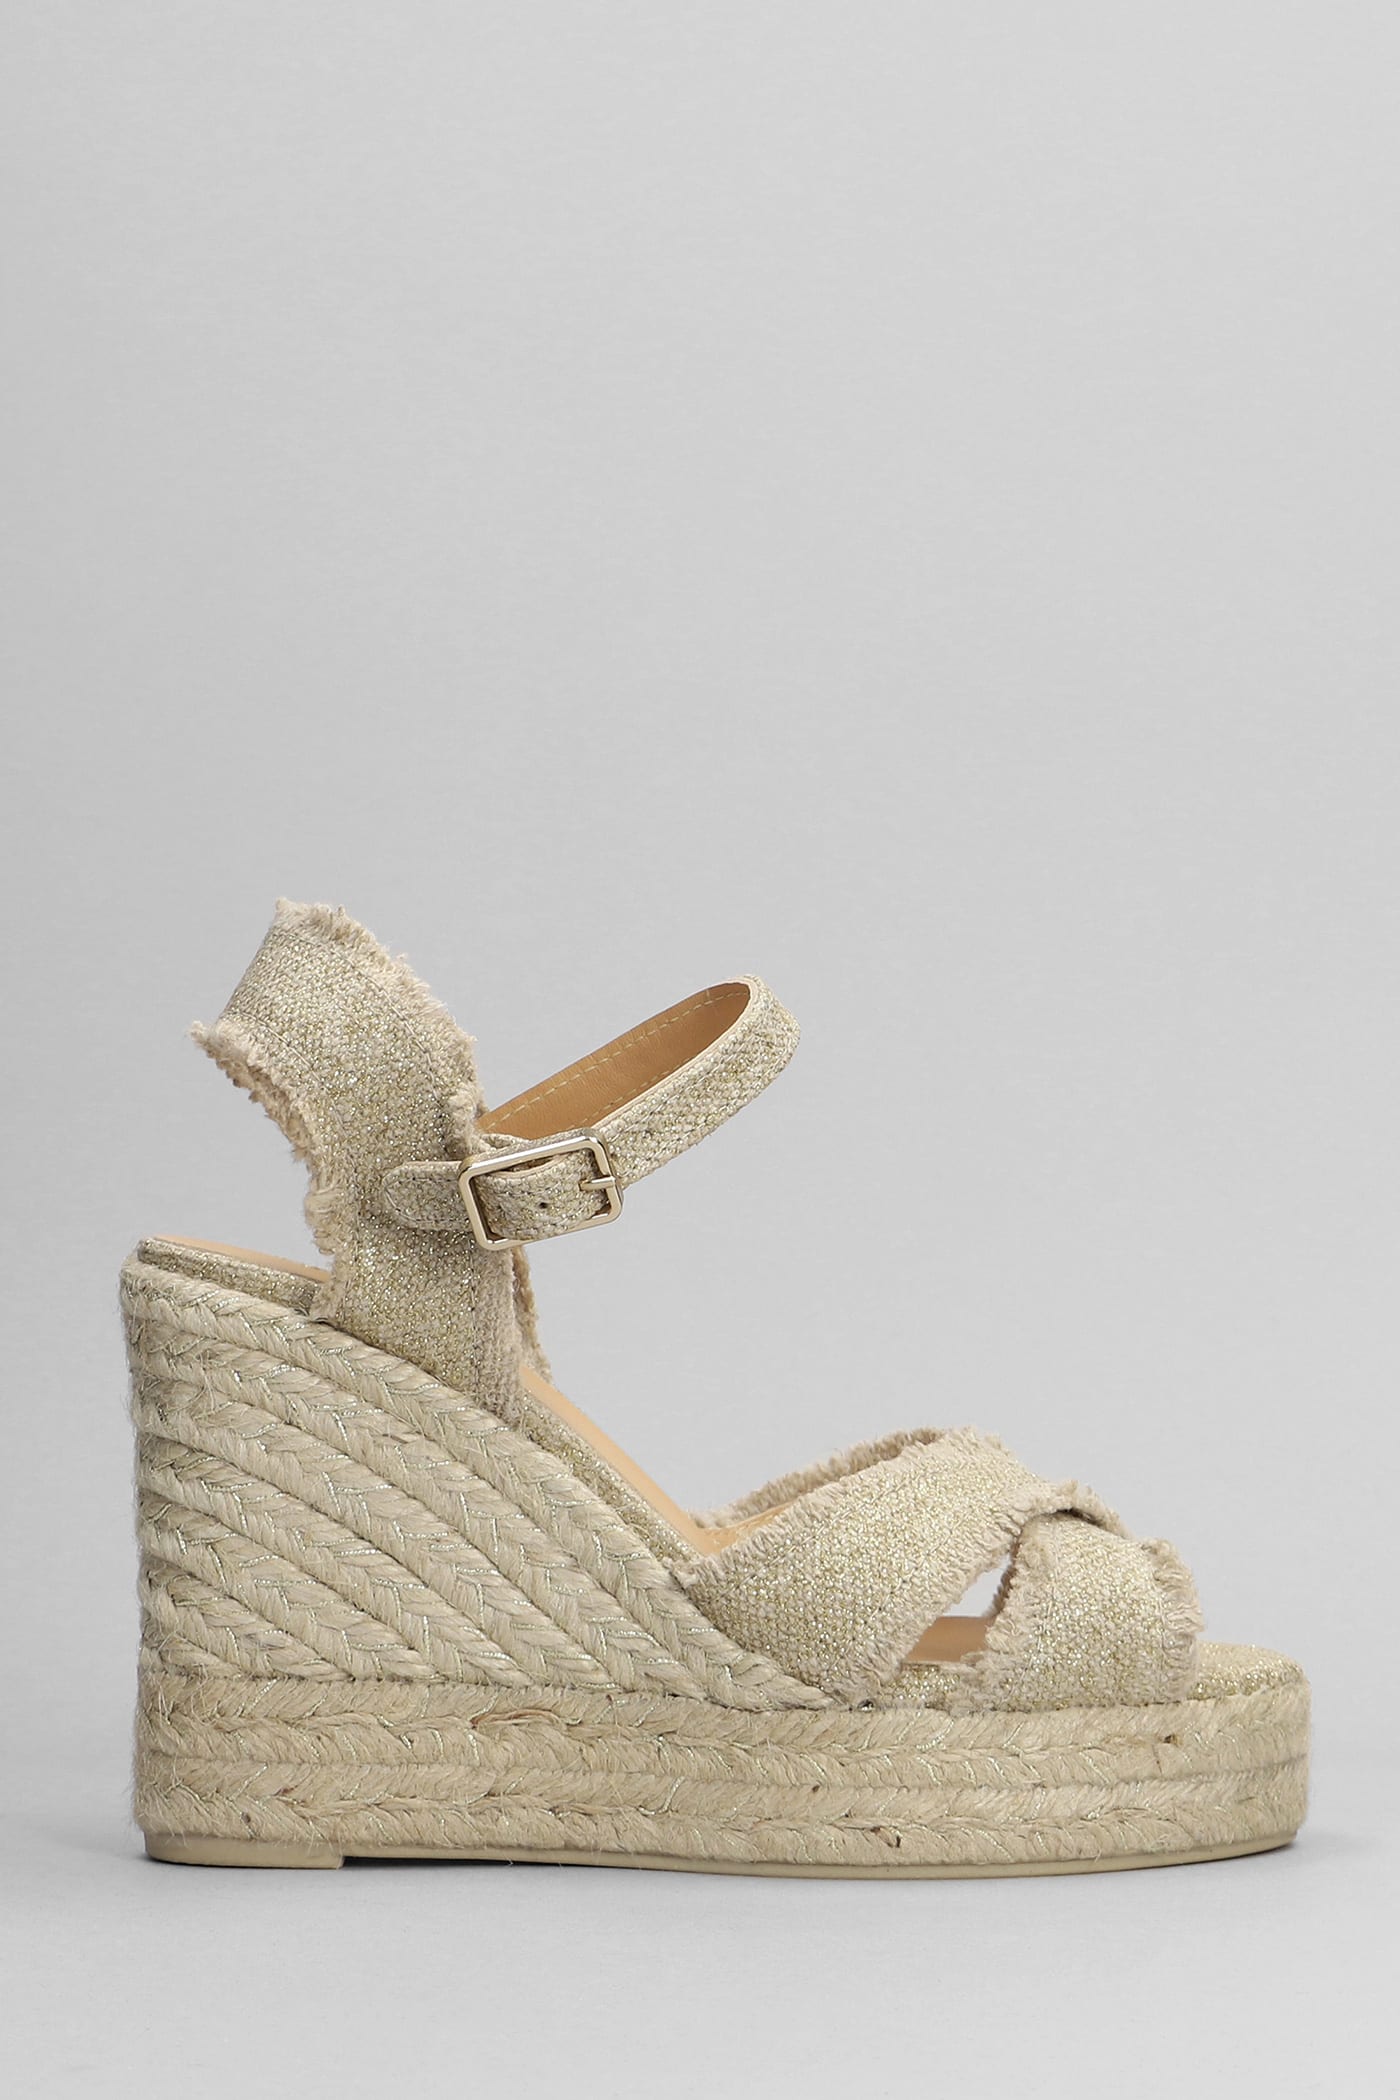 Castañer Bromelia-8ed-032 Wedges In Gold Canvas